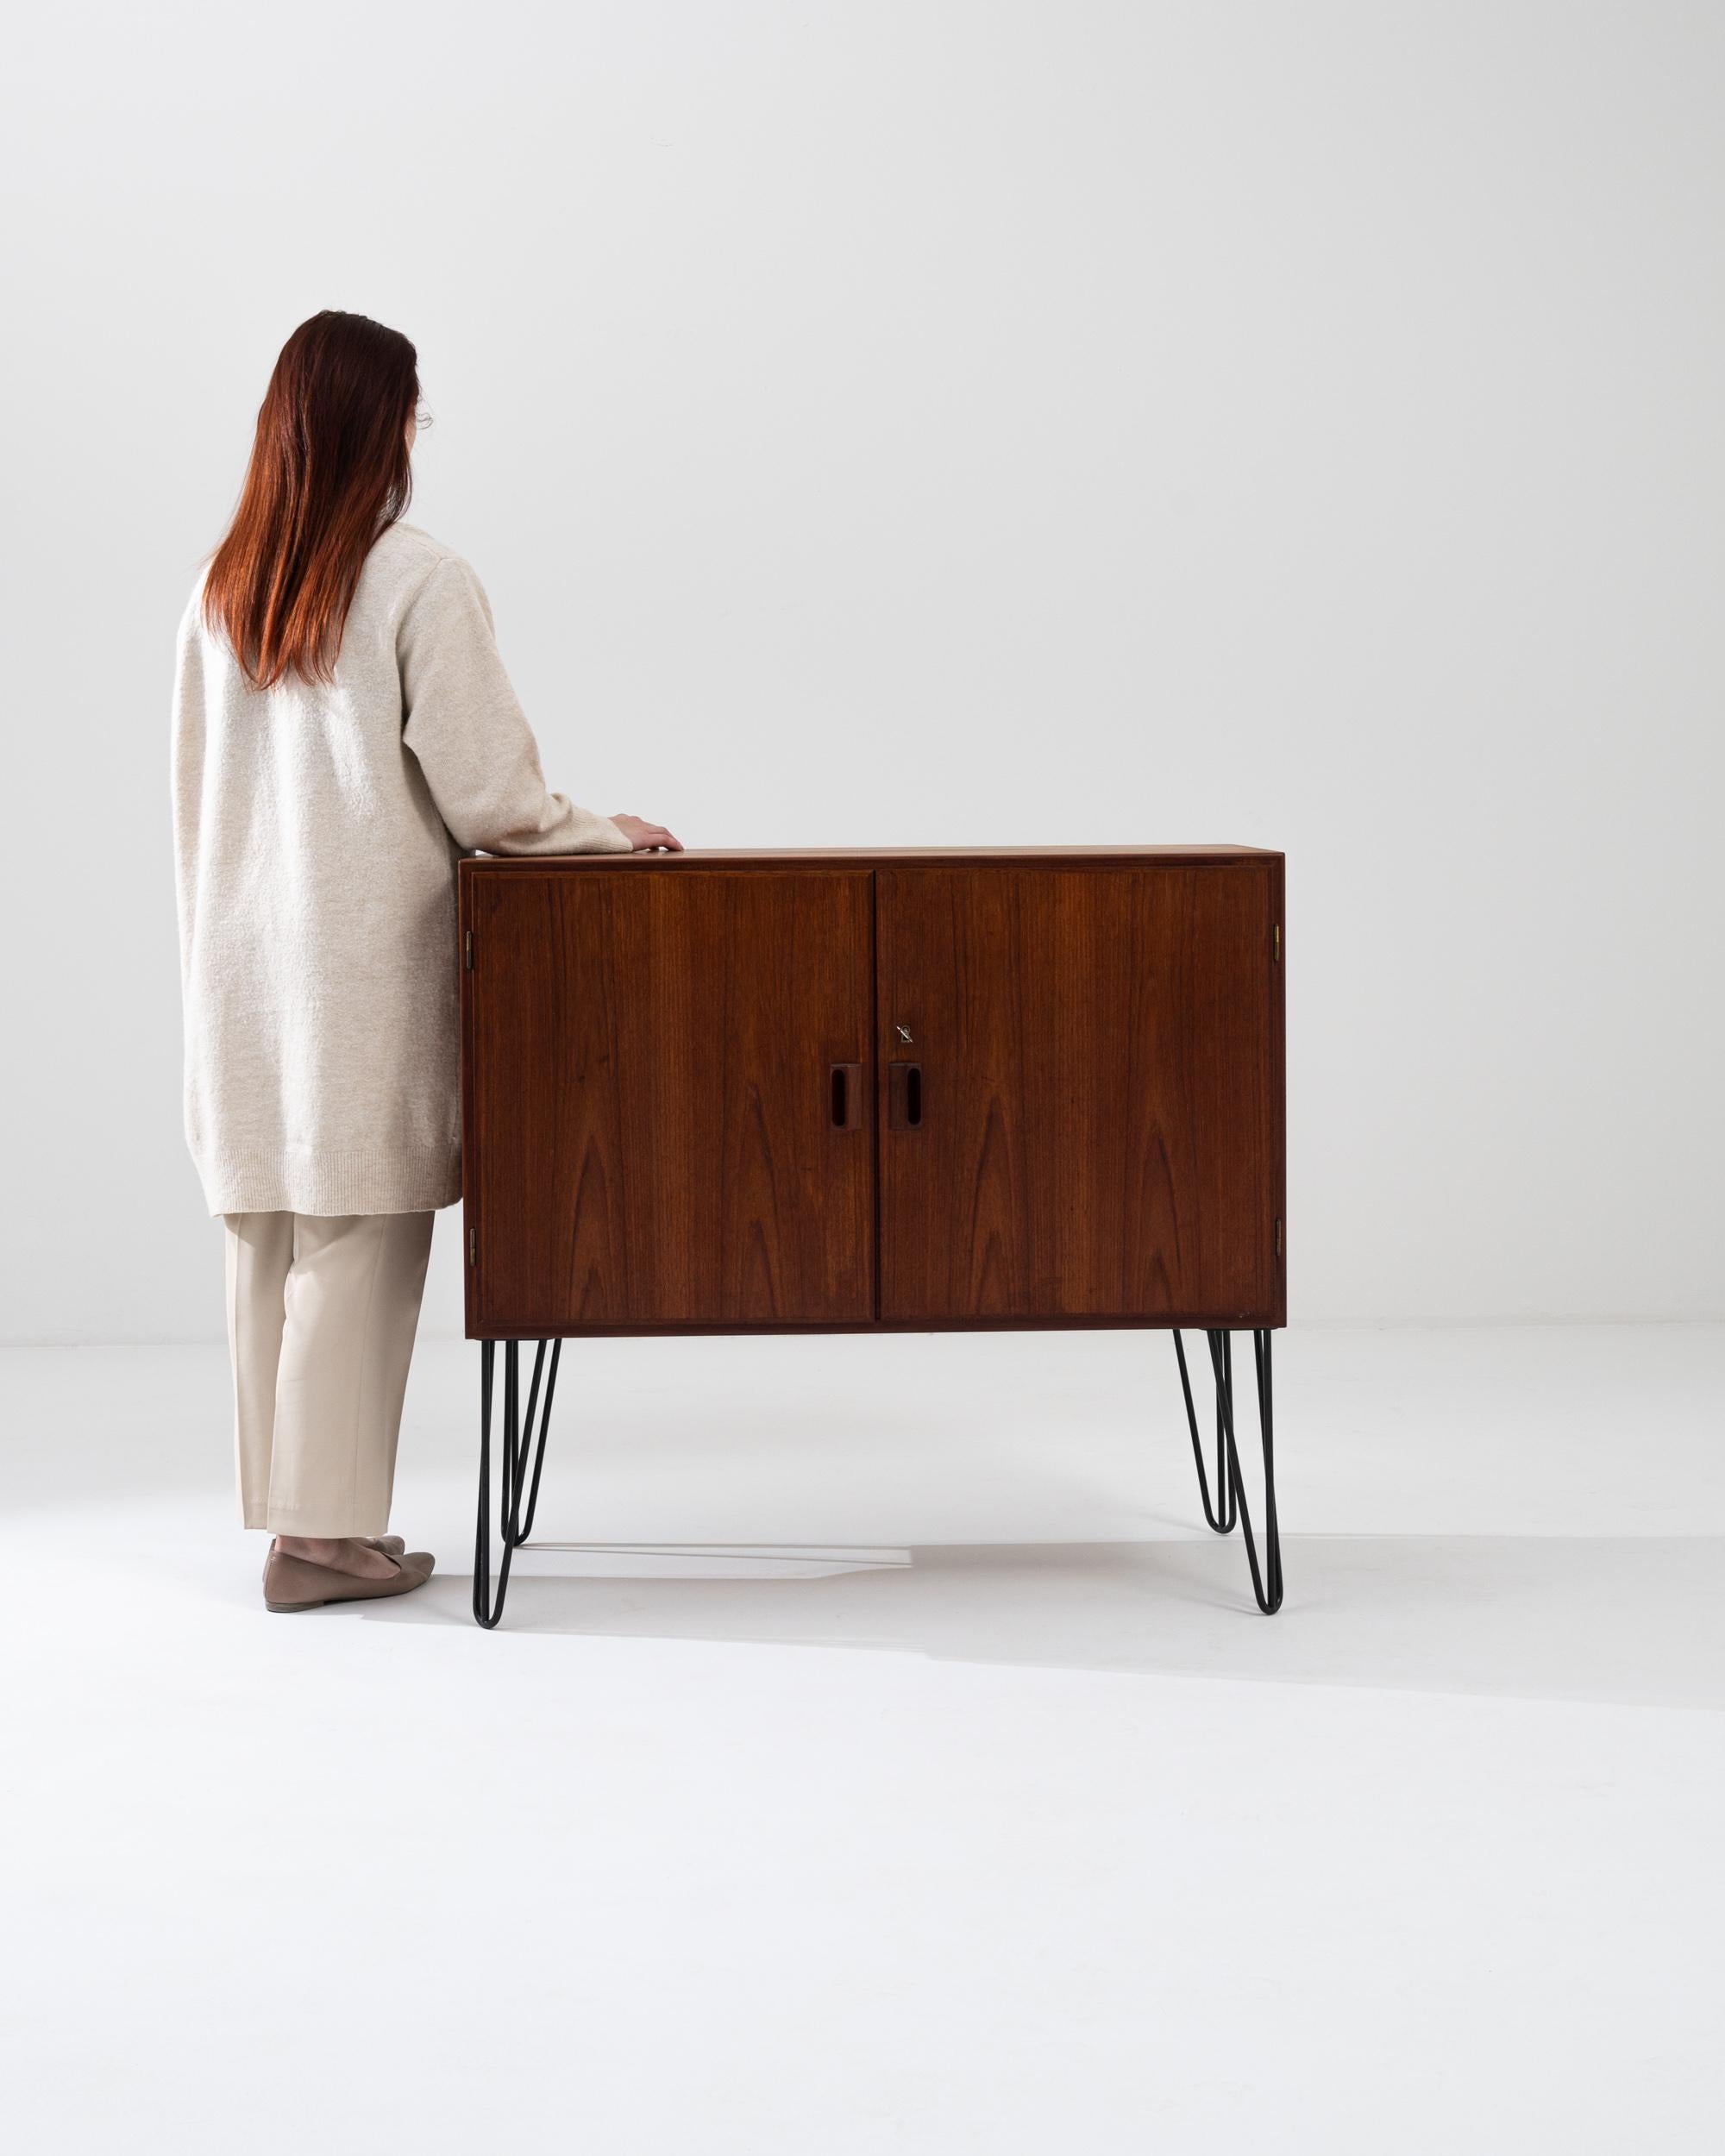 Combining a geometric silhouette with the opulent warmth of teak, this vintage console cabinet offers a delightful Mid-Century Modern collector’s piece. Made in Denmark in the 20th century, the clean lines of the rectilinear case speak to a